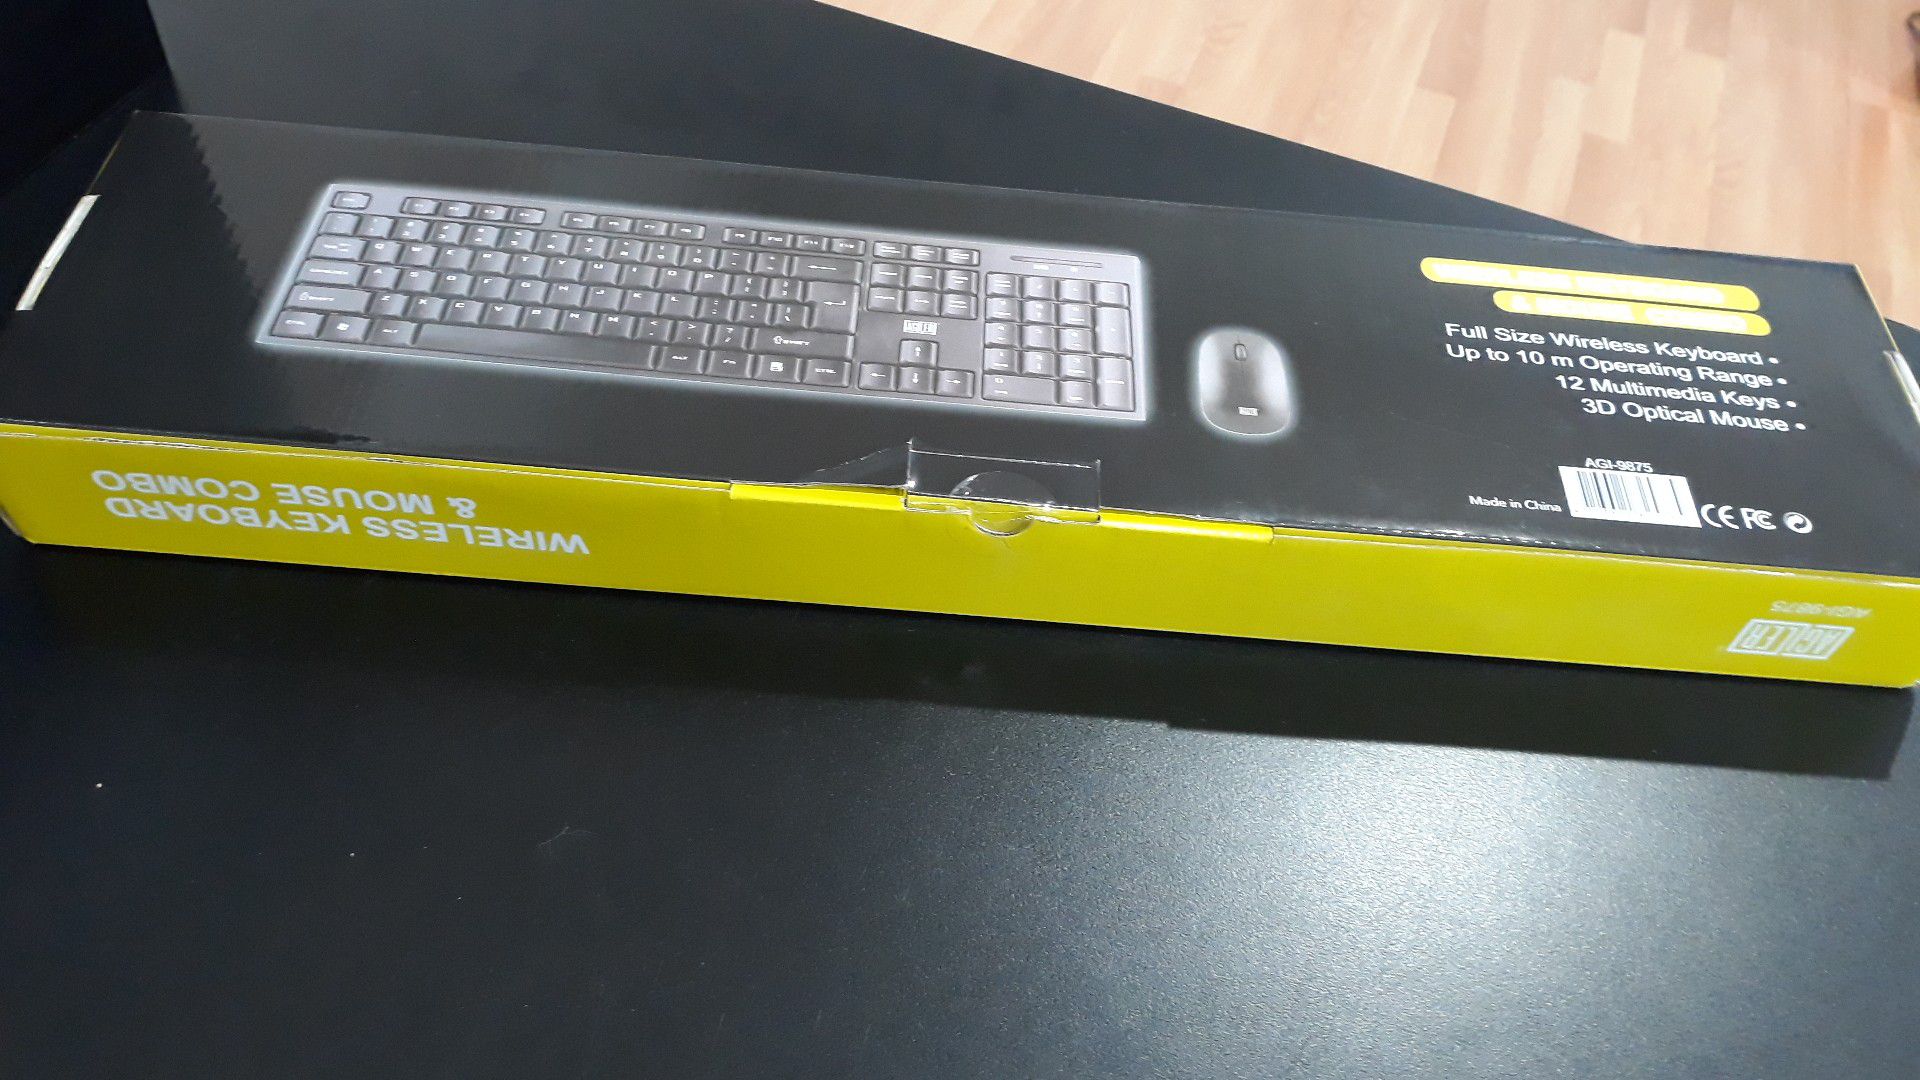 NEW WIRELESS KEYBOARD AND MOUSE COMBO